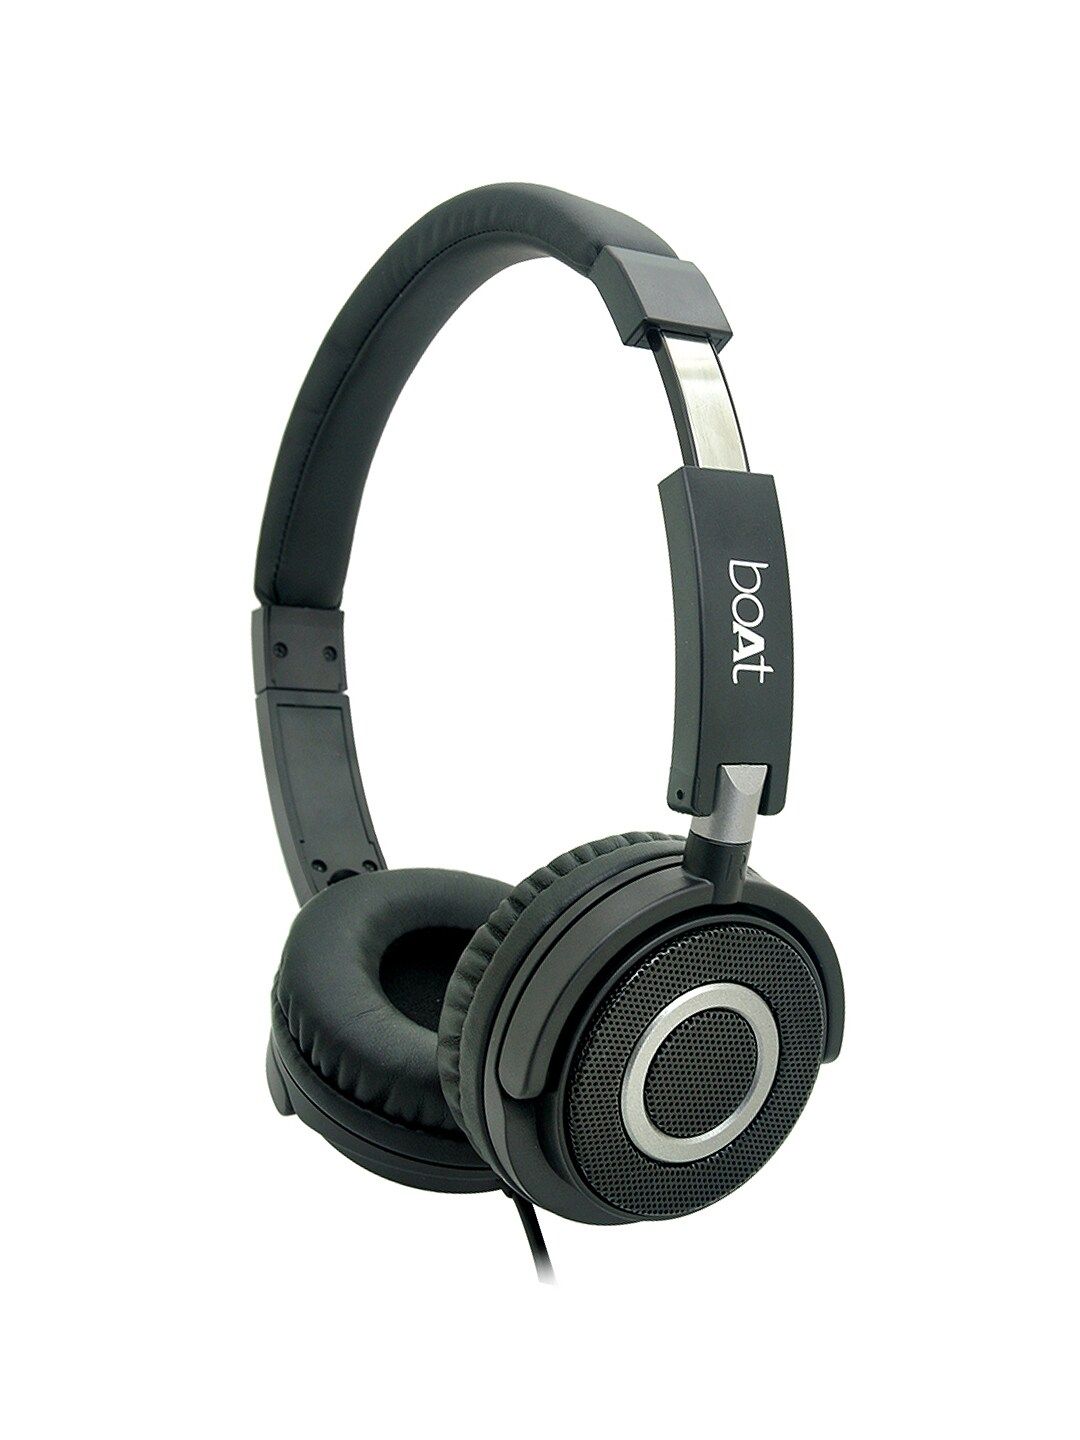 boAt BassHeads 900 Black Wired Headset with Enhanced Bass & Lightweight Foldable Design Price in India